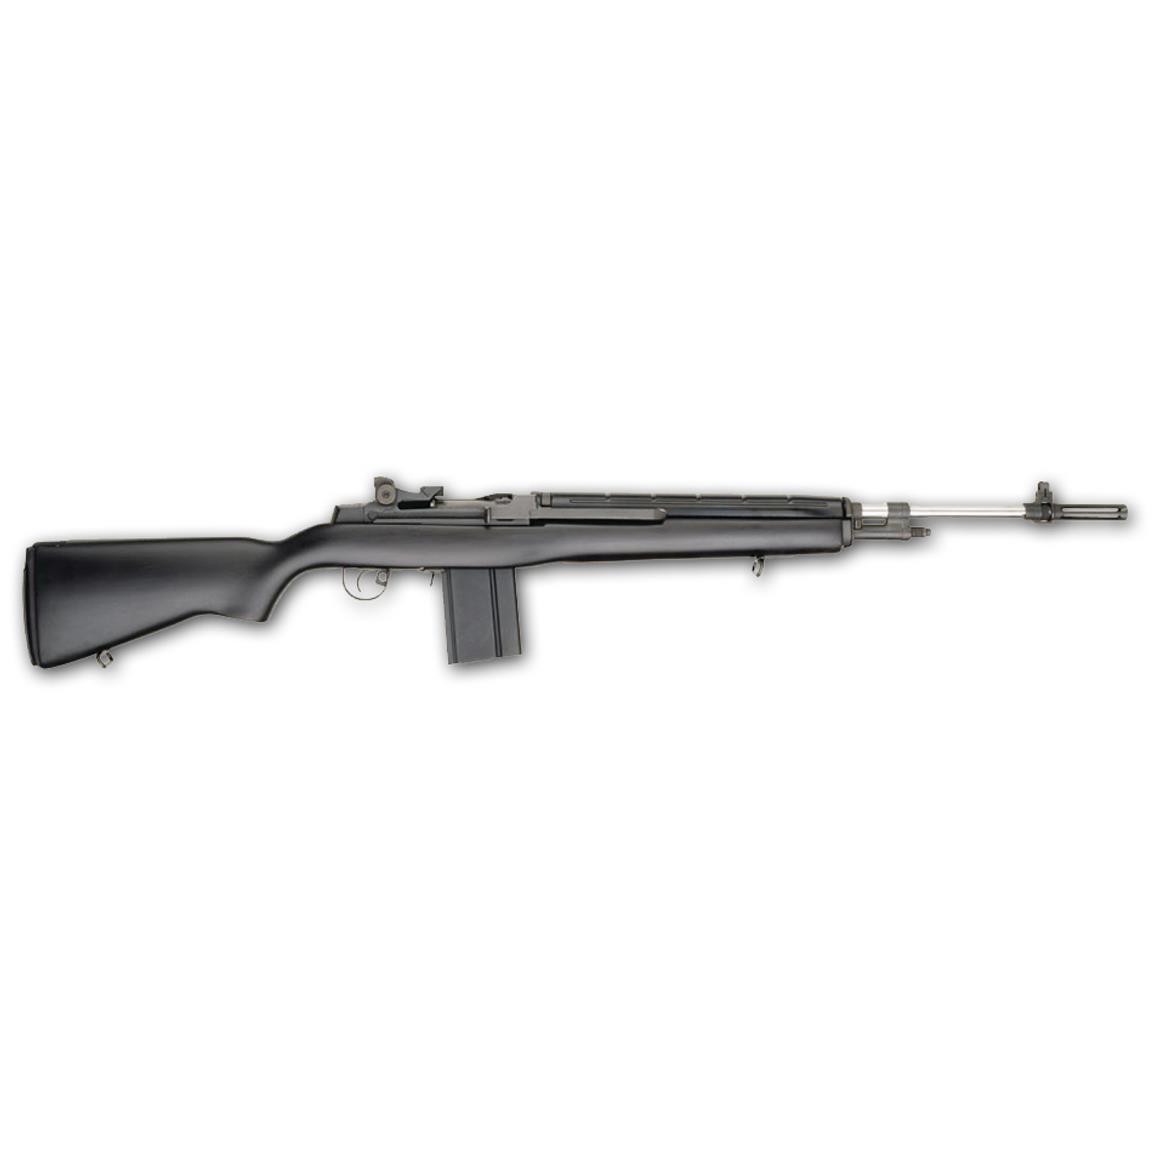 Springfield M1A Super Match, Semi-Automatic, .308 Winchester, 22" Stainless Match Barrel, 10+1 Rds.